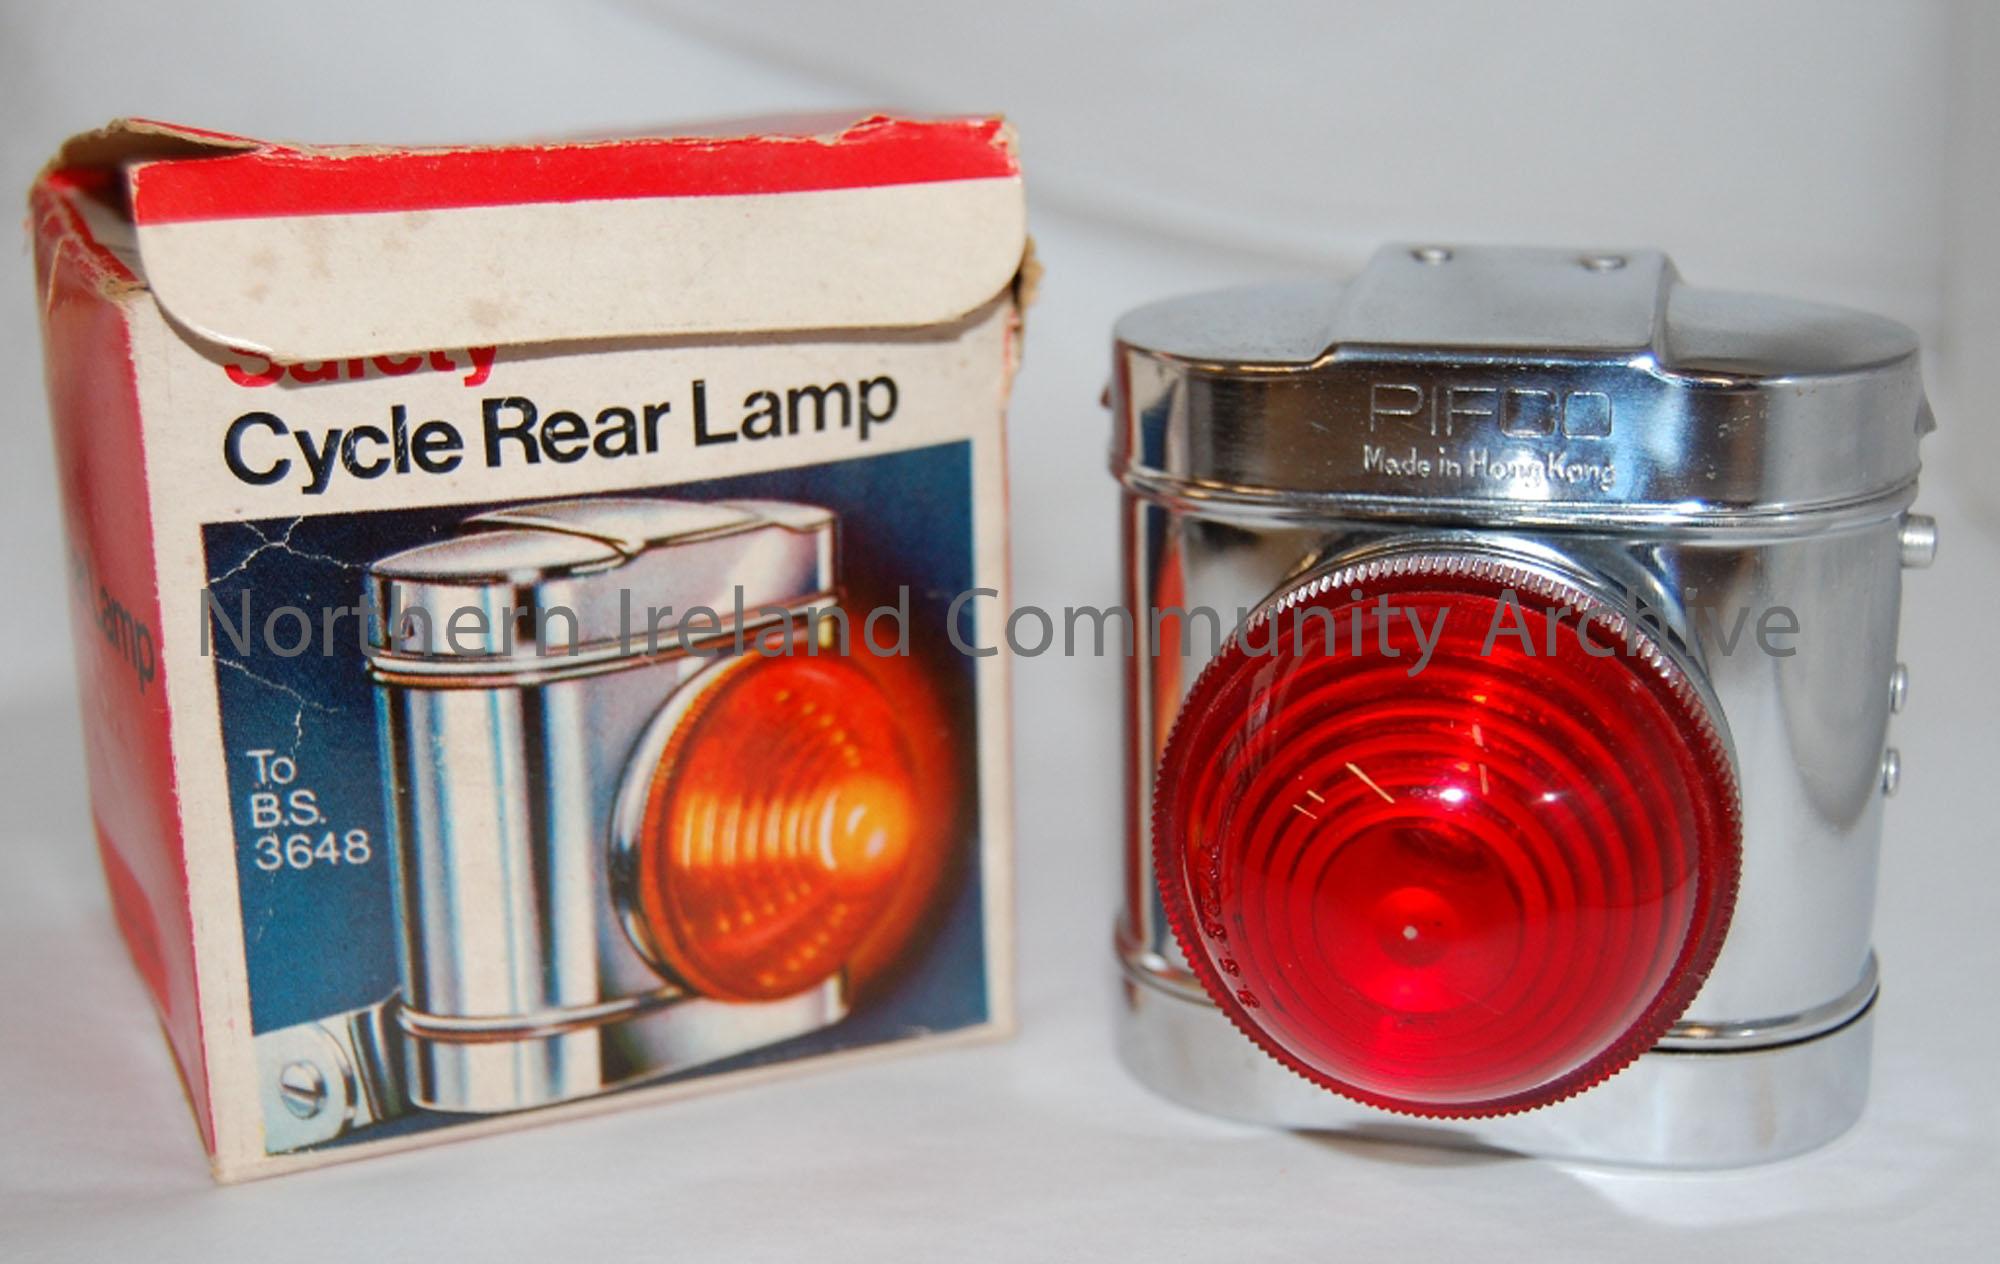 Pifco safety cycle rear lamp. To B.S.3648. Chrome finish. Uses two large unit cells. In original box.